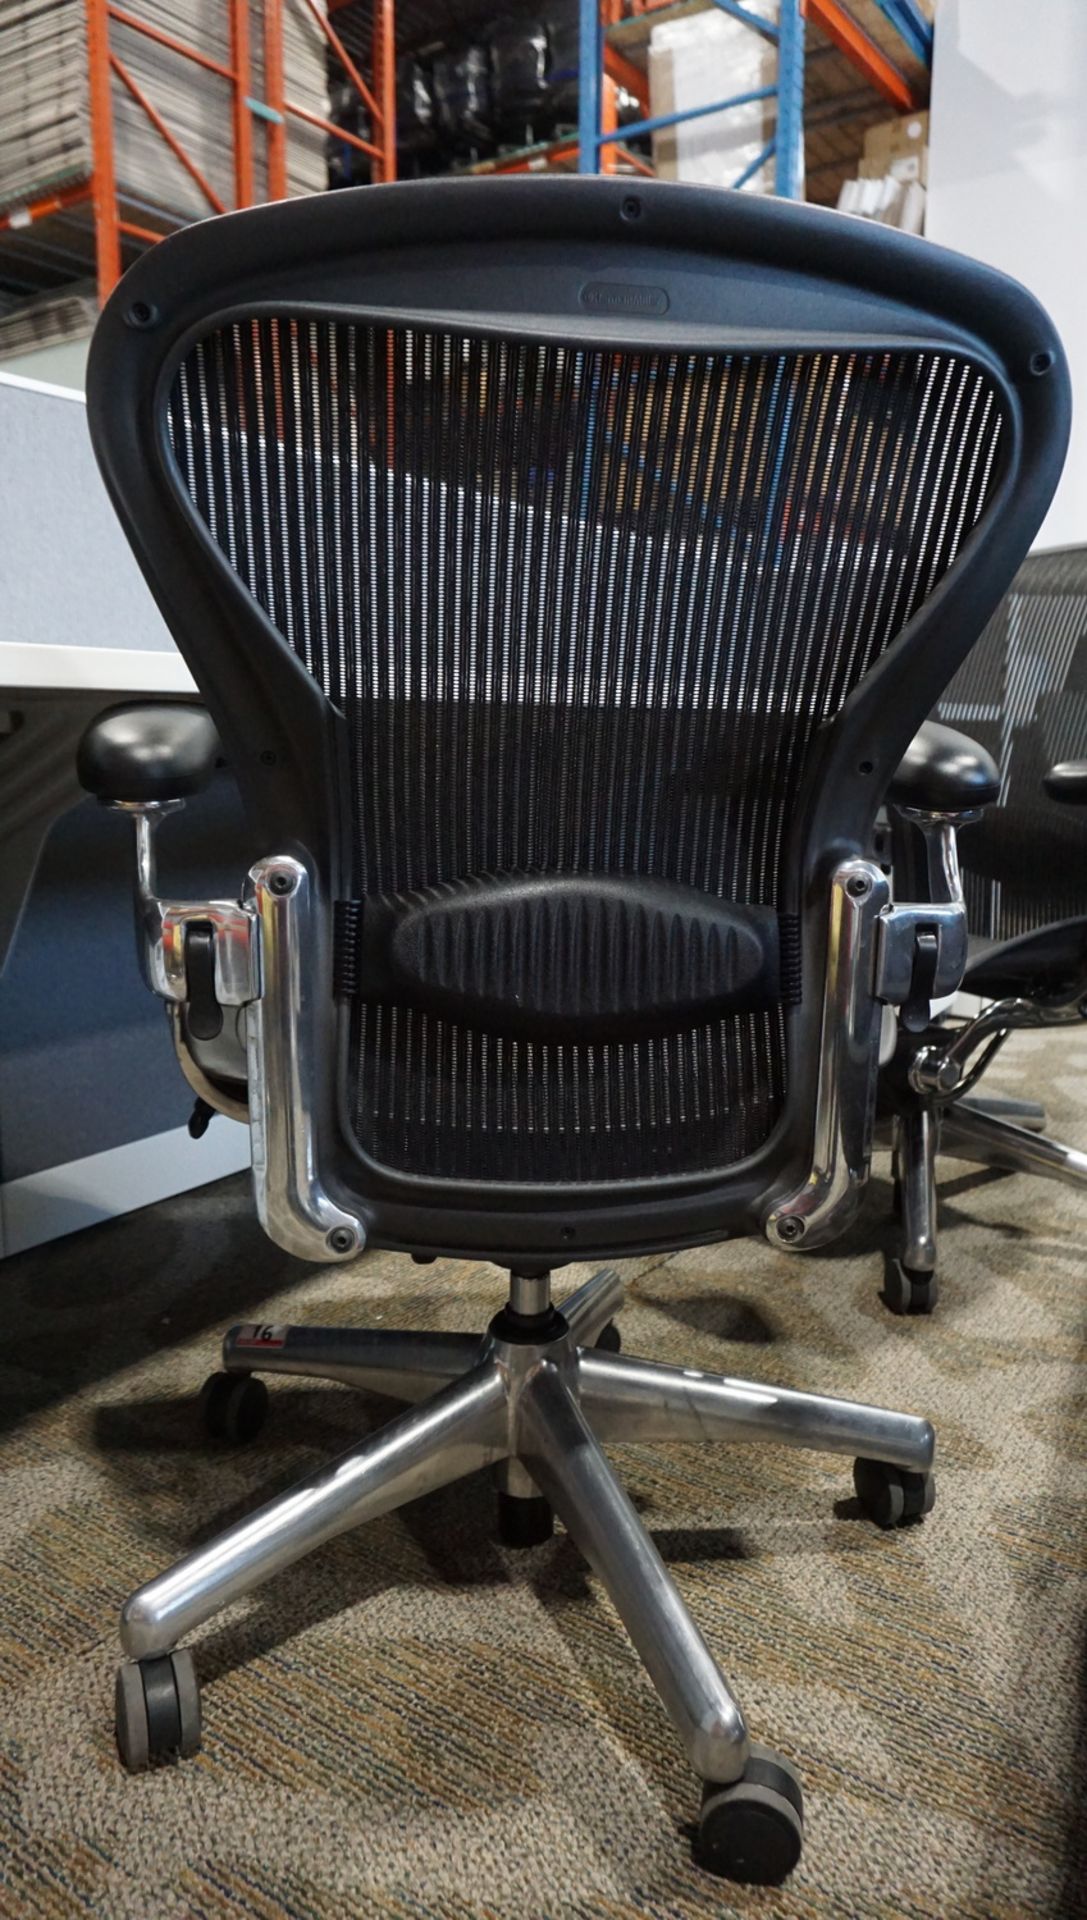 HERMAN MILLER AERON (SIZE B) OFFICE CHAIR W/ POLISHED ALUMINUM FRAME & BASE, LUMBAR SUPPORT, - Image 2 of 2